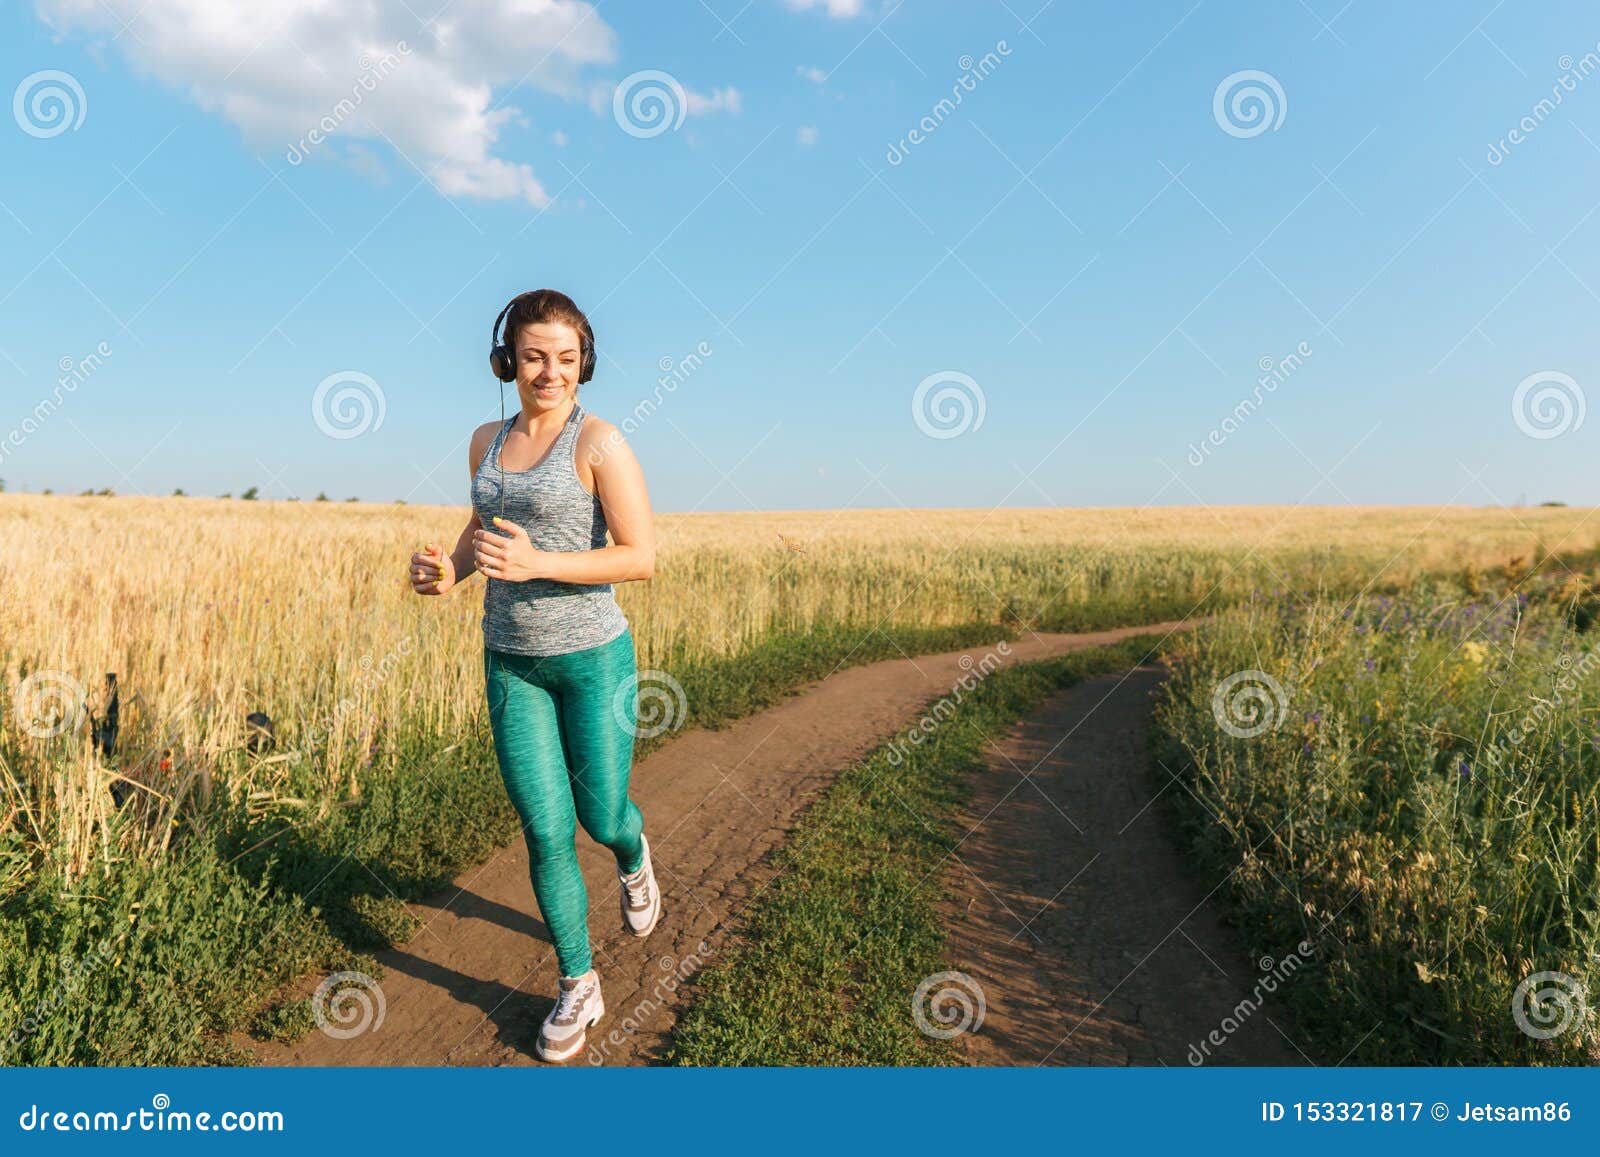 Woman Jogger Working Out In The Morning Sunny Day Stock Image Image